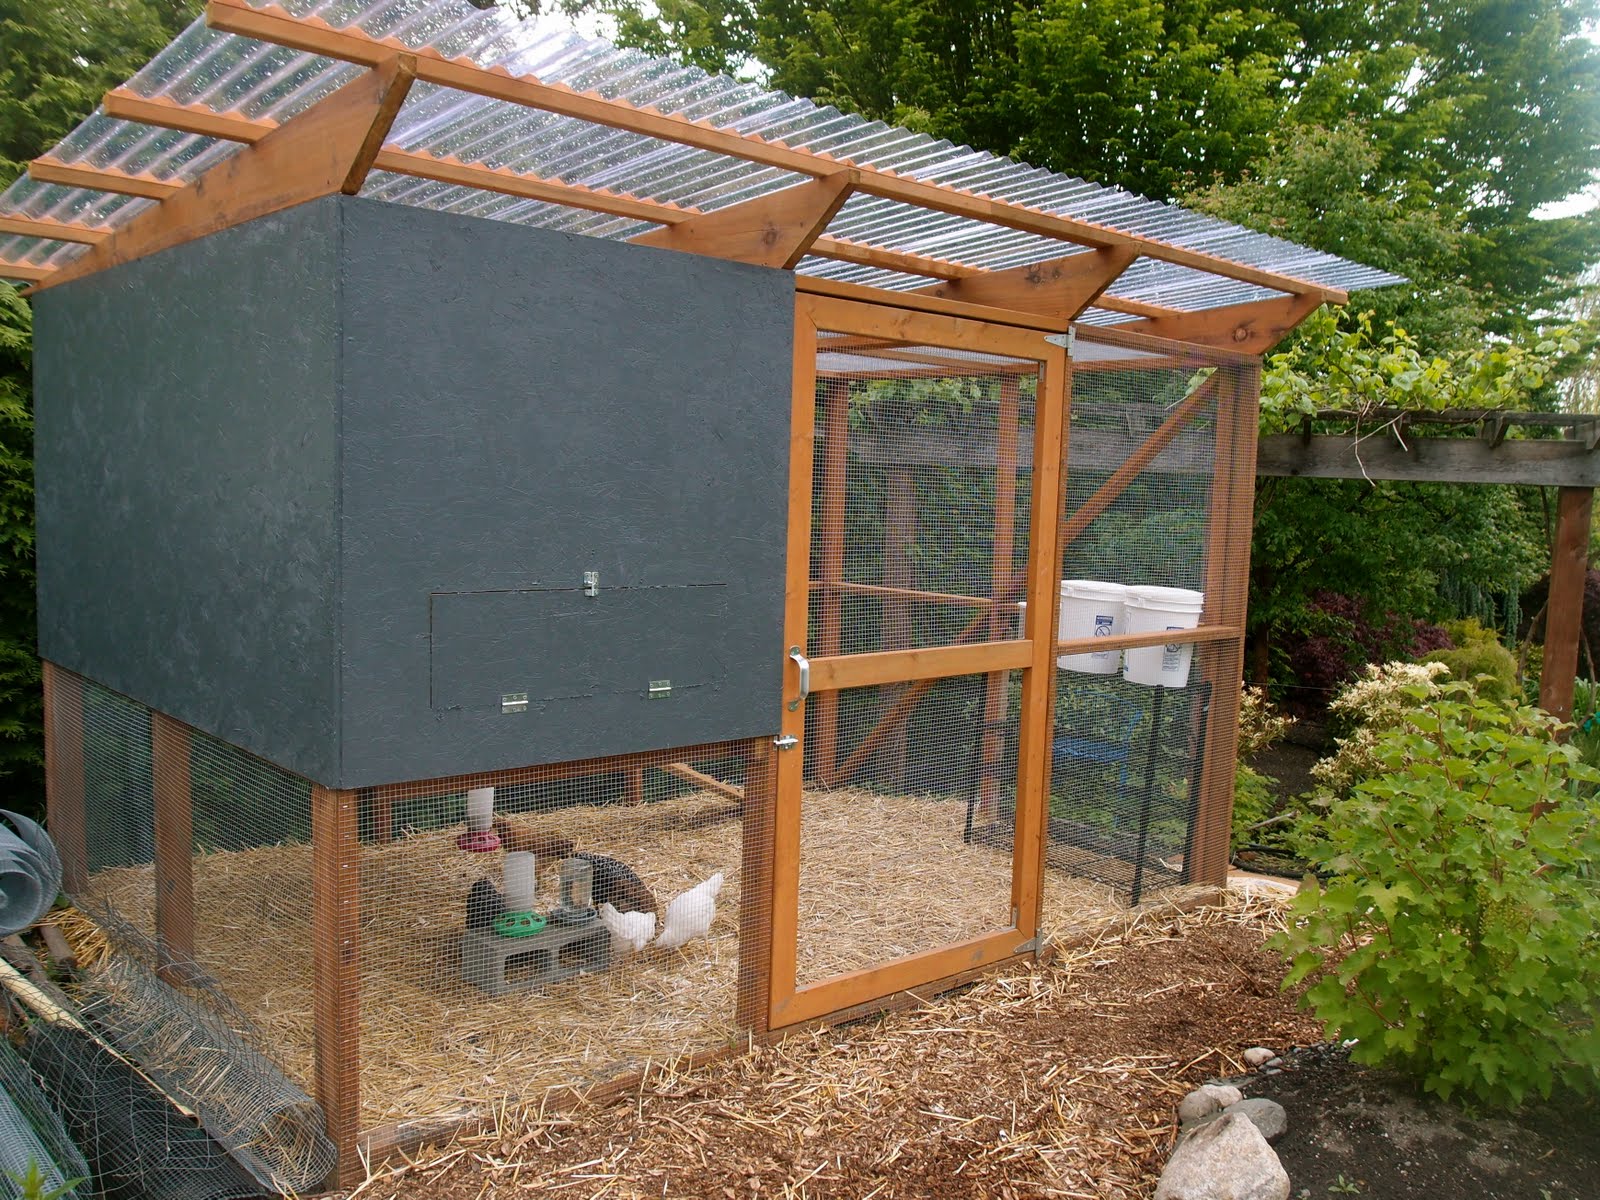 How to build a slanted roof chicken coop Info | Coop Channel